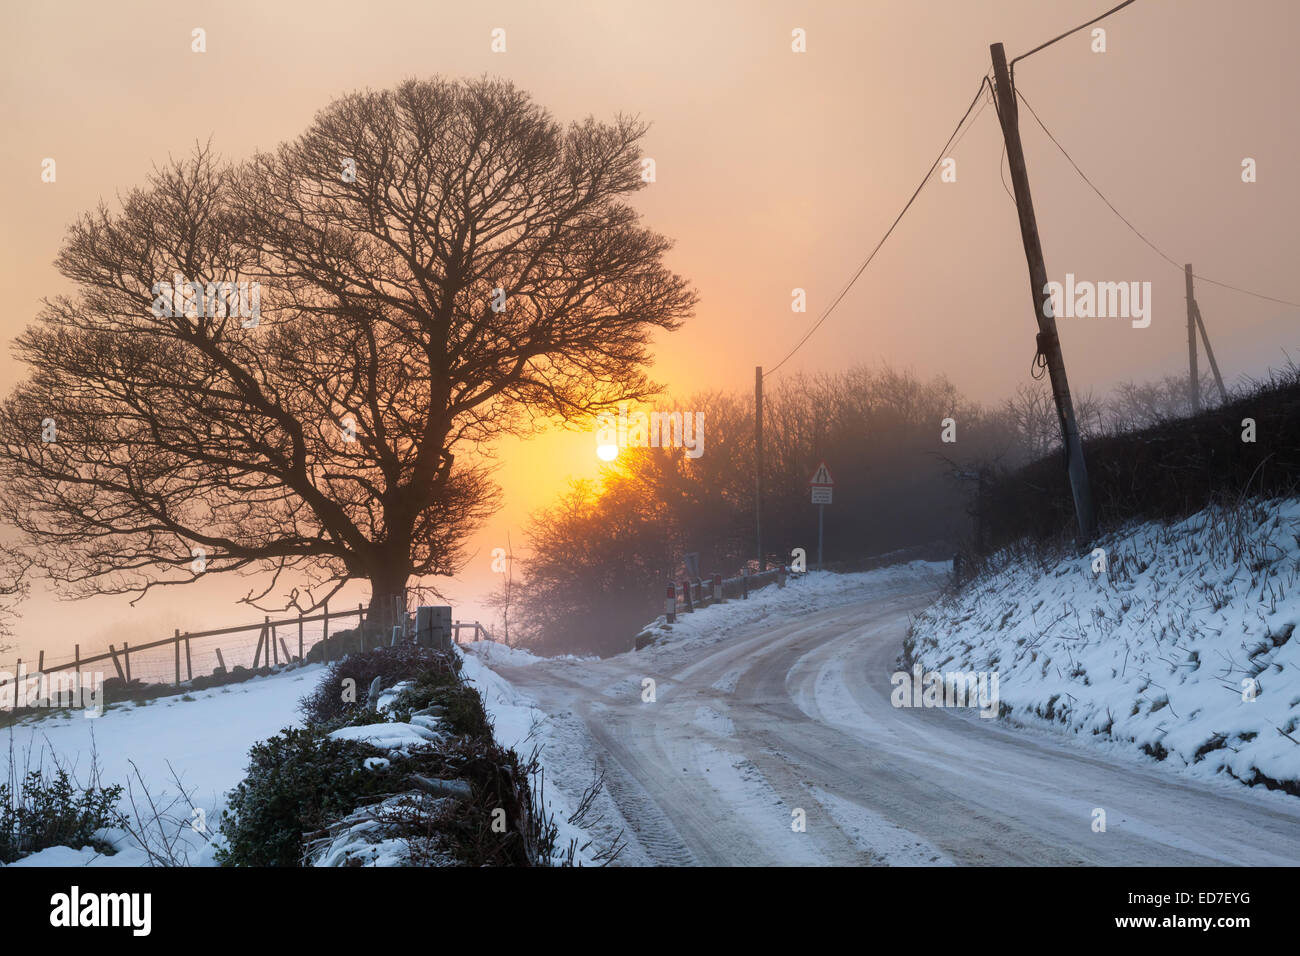 Crich, Derbyshire, UK. 31st December 2014. A cold, frosty and misty start to the last day of 2014 creating a wintry sunrise in the countryside near to the village of Crich. The weather is forecast to turn milder for the New Year. Credit:  Mark Richardson/Alamy Live News Stock Photo